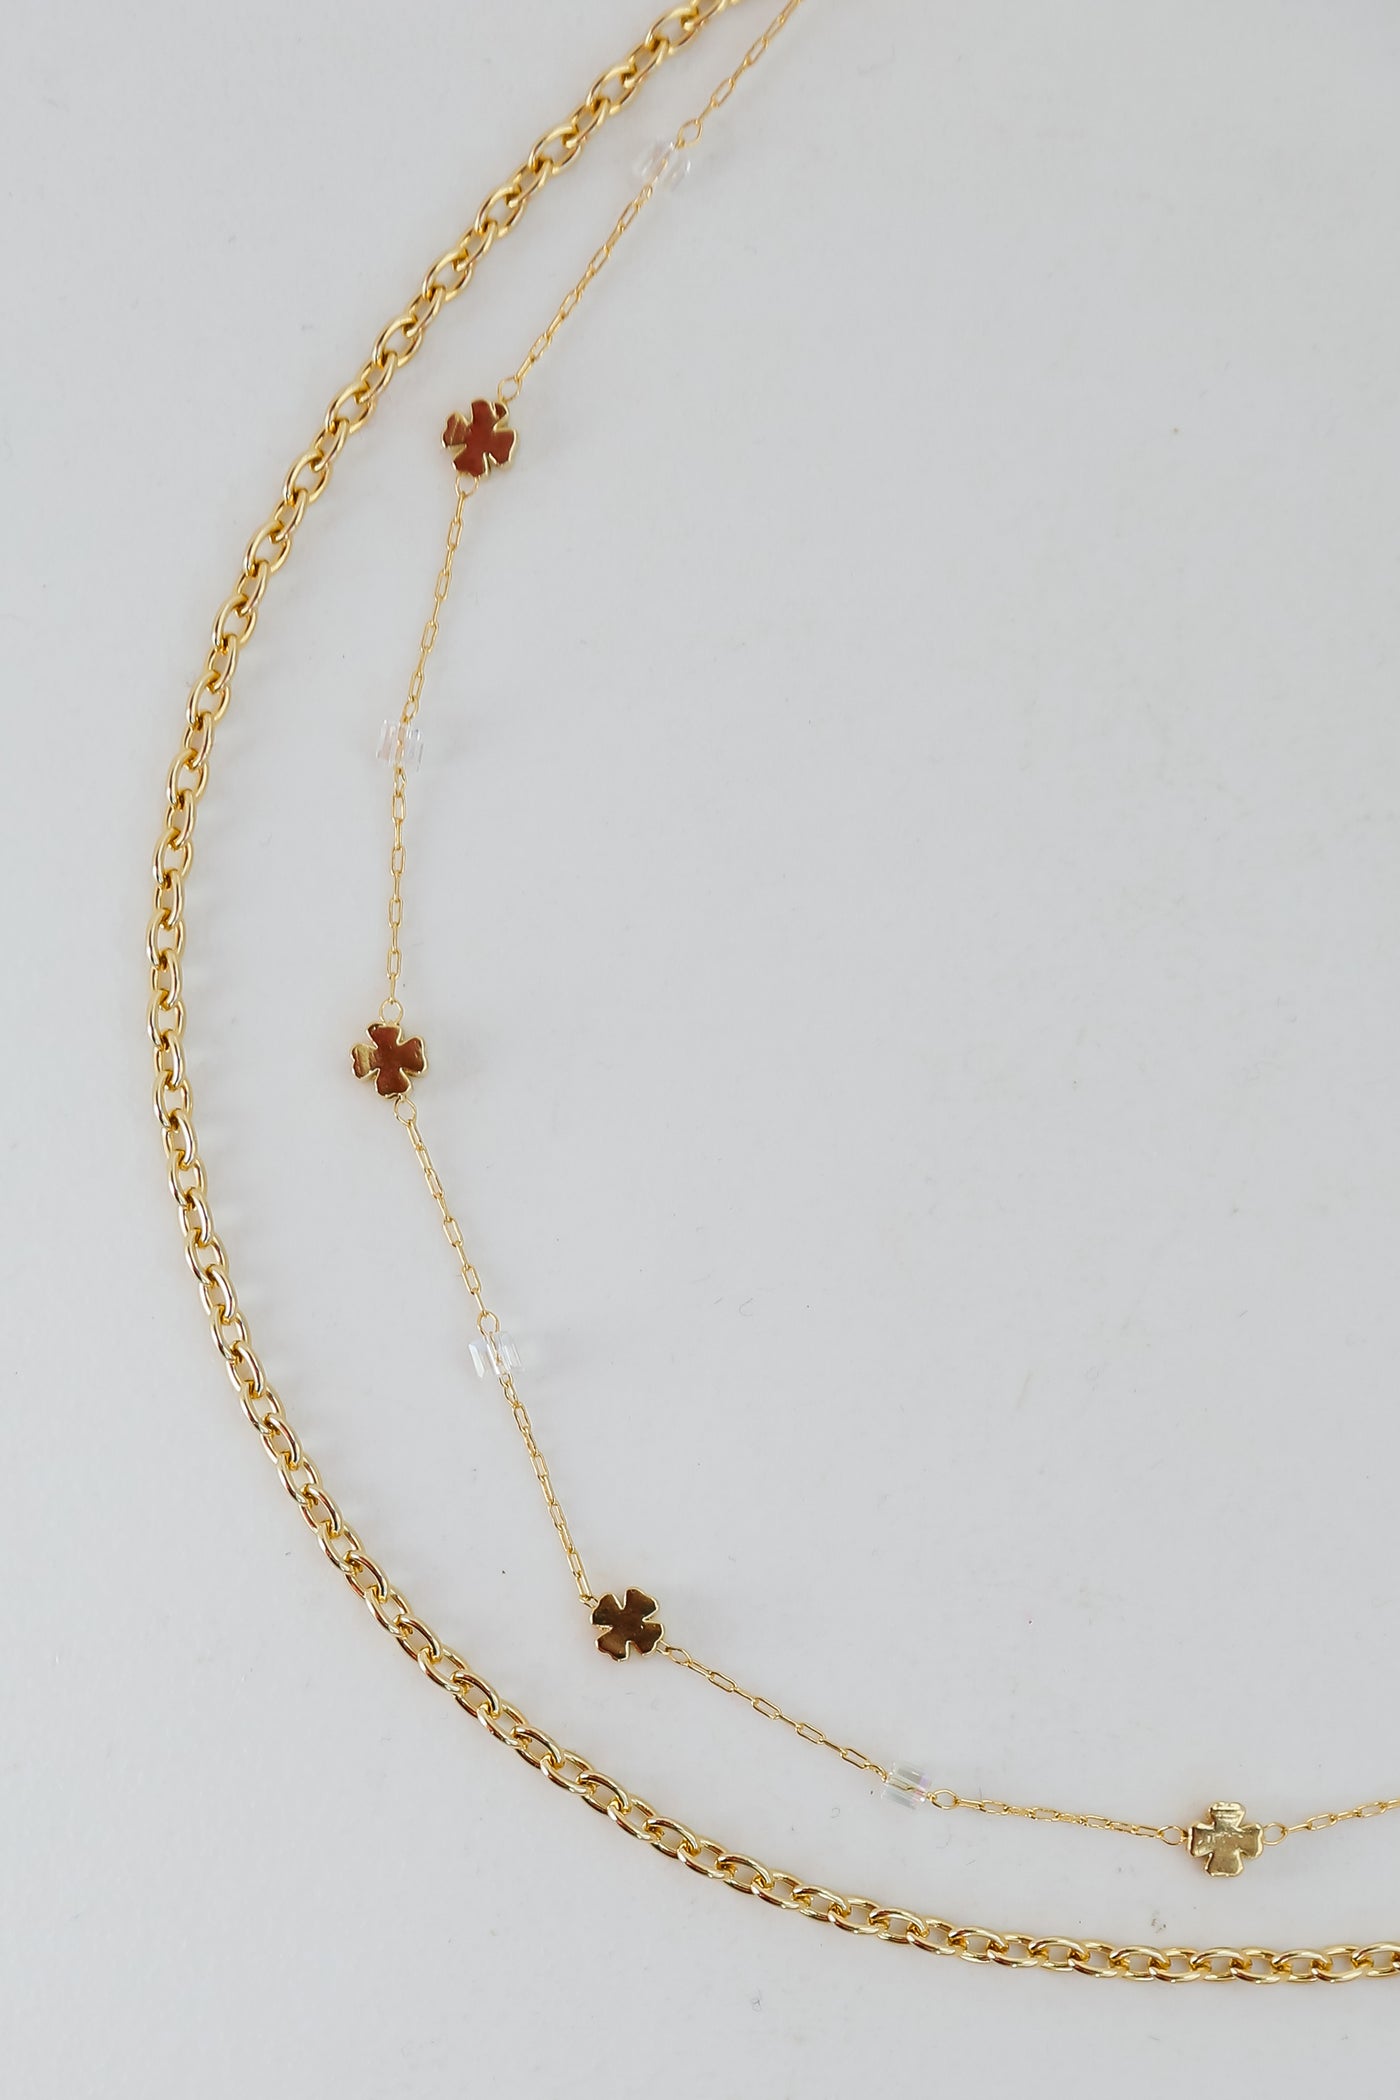 Gold Four Leaf Clover Layered Chain Necklace